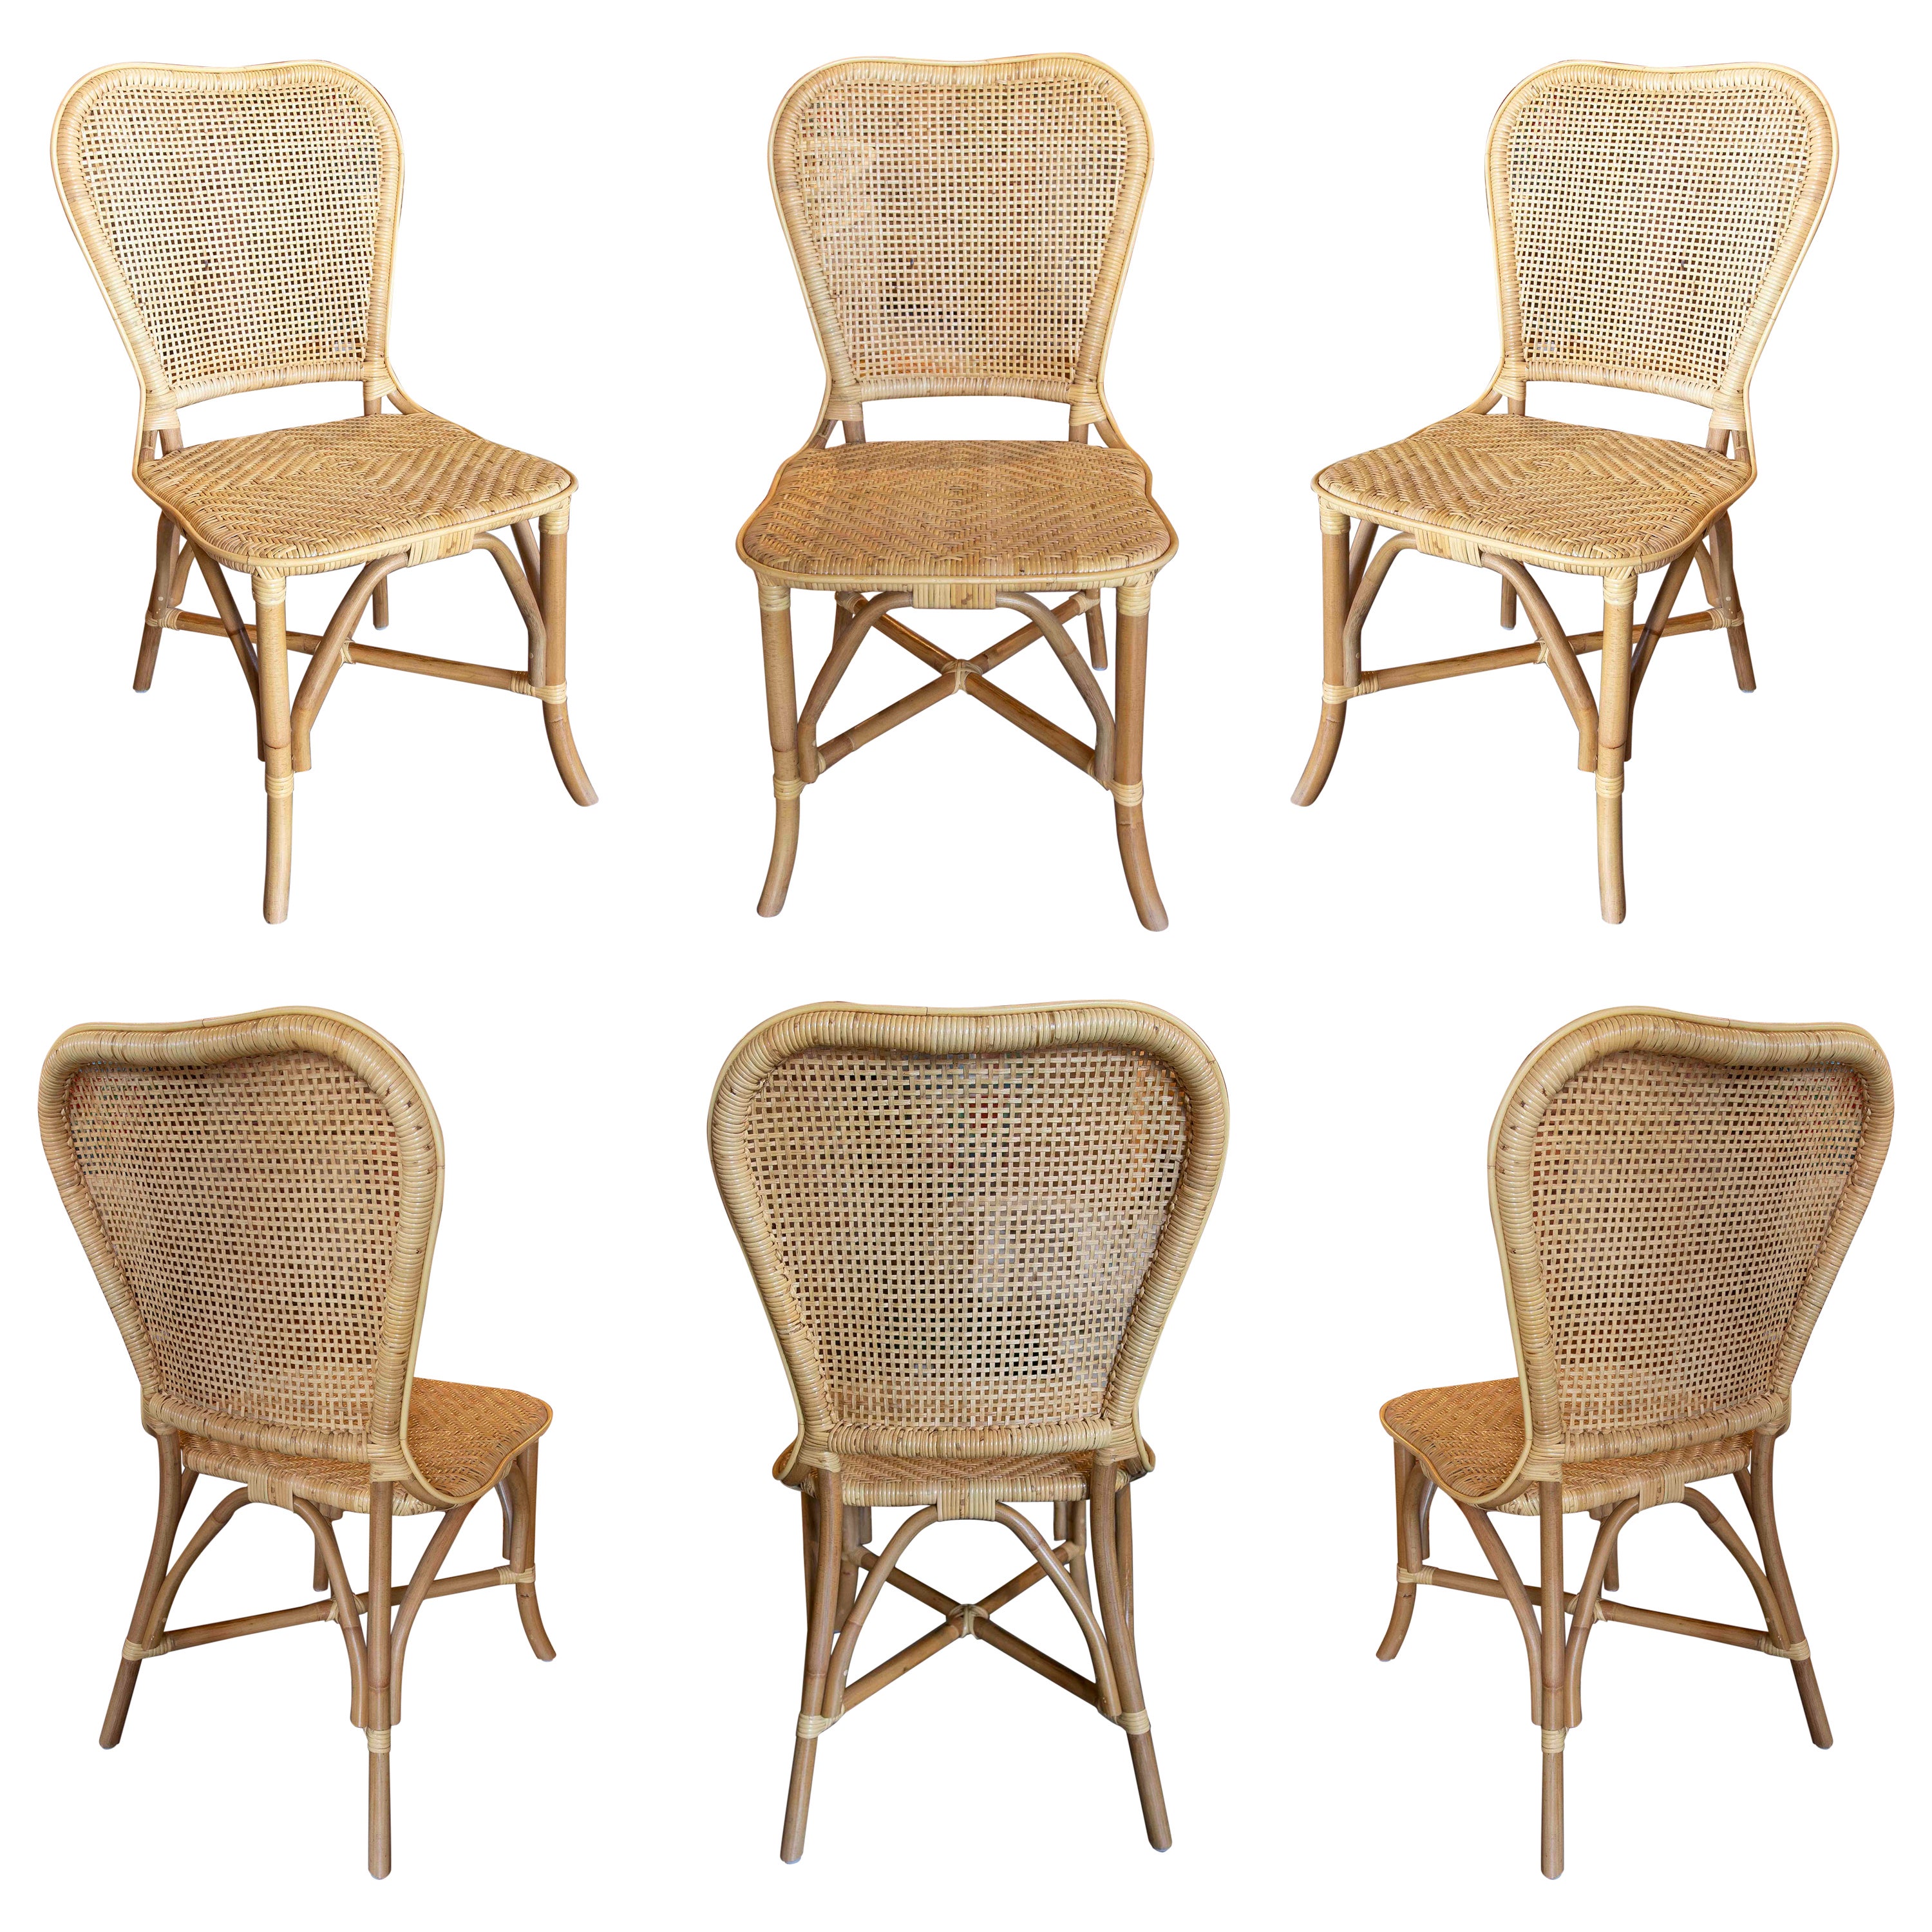 Set of Six Wicker and Rattan Dining Chairs